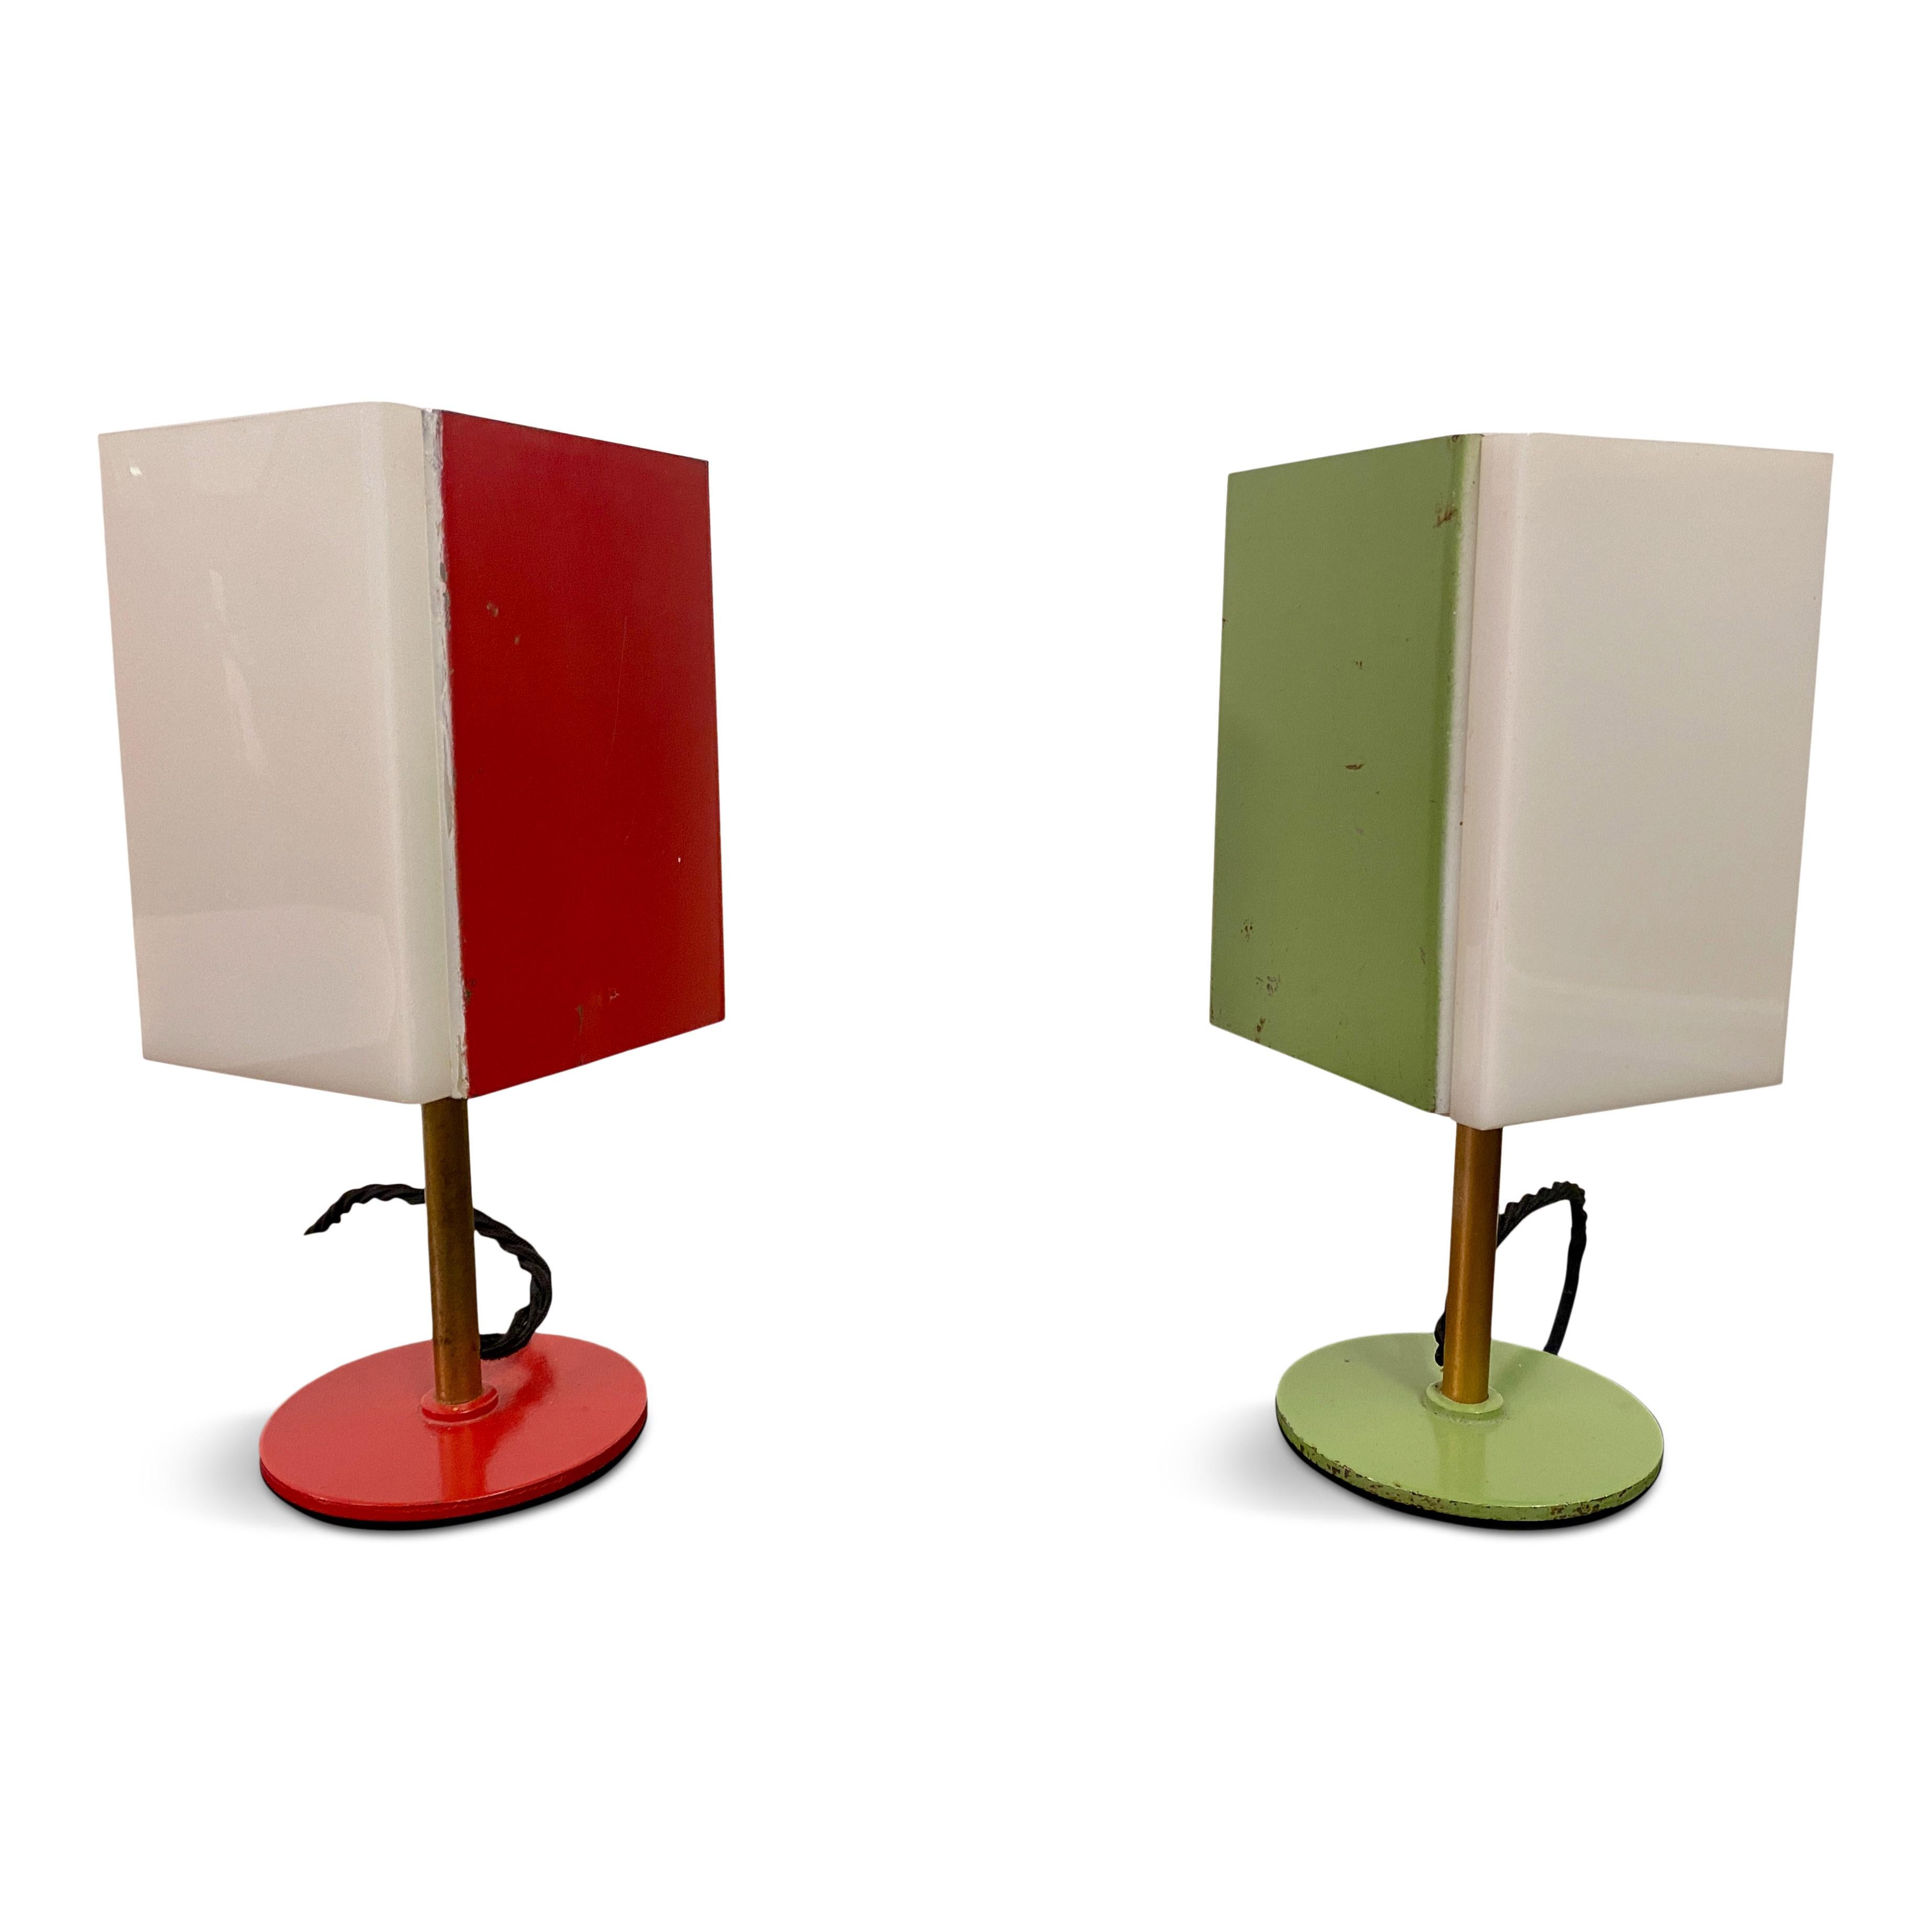 Pair of table lamps

Perspex and coloured metal

Painted steel base

Black cord flex

Italy 1950s/1960s